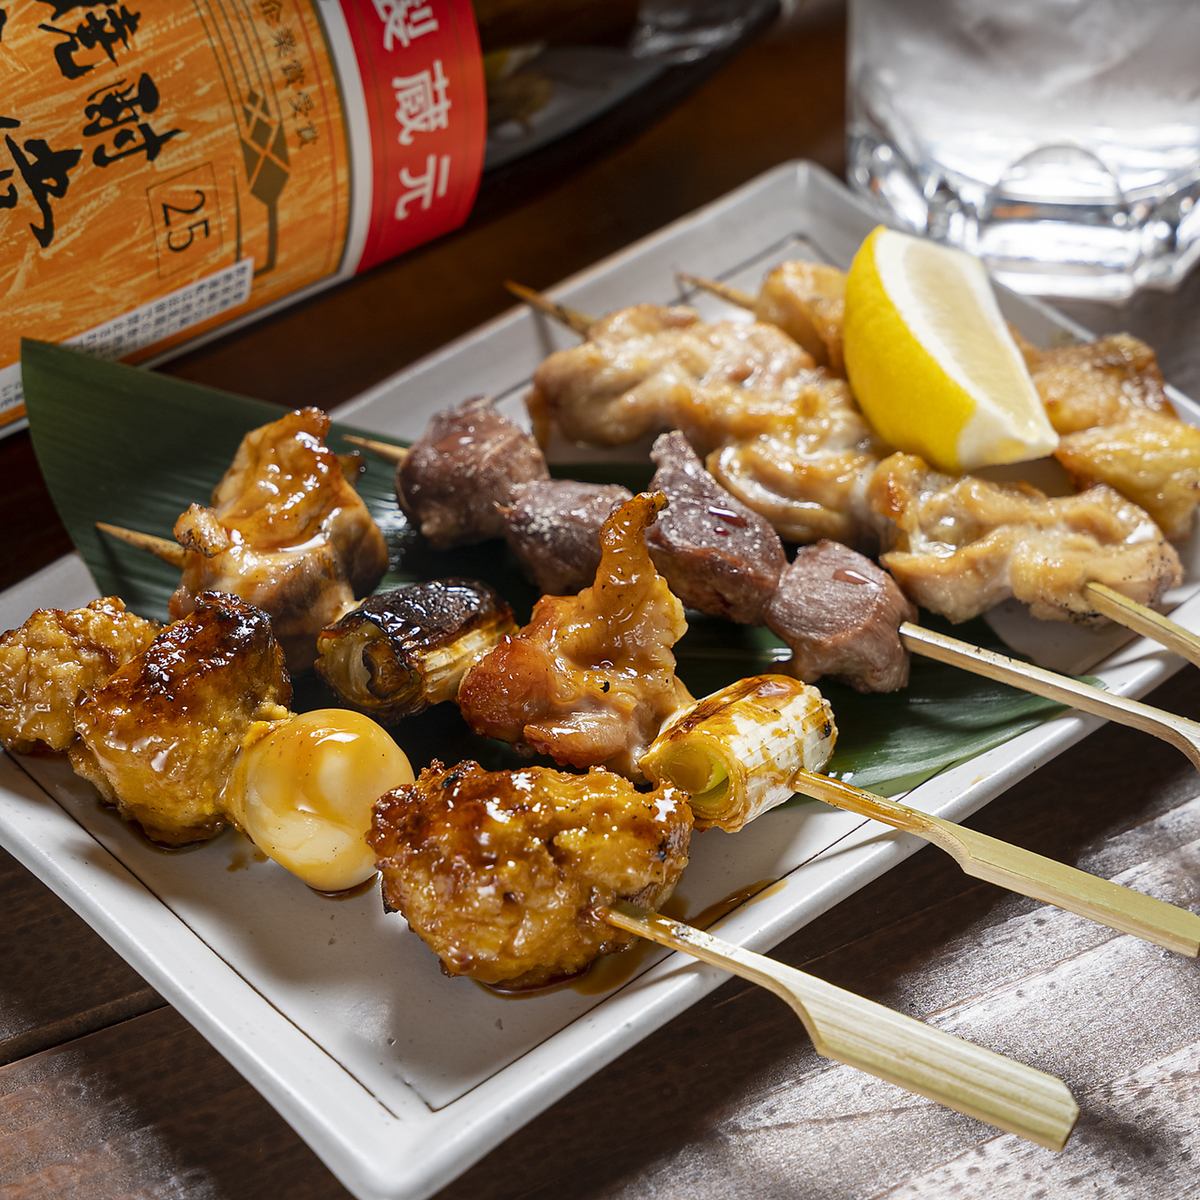 Our proud charcoal-grilled yakitori goes great with sake ◎